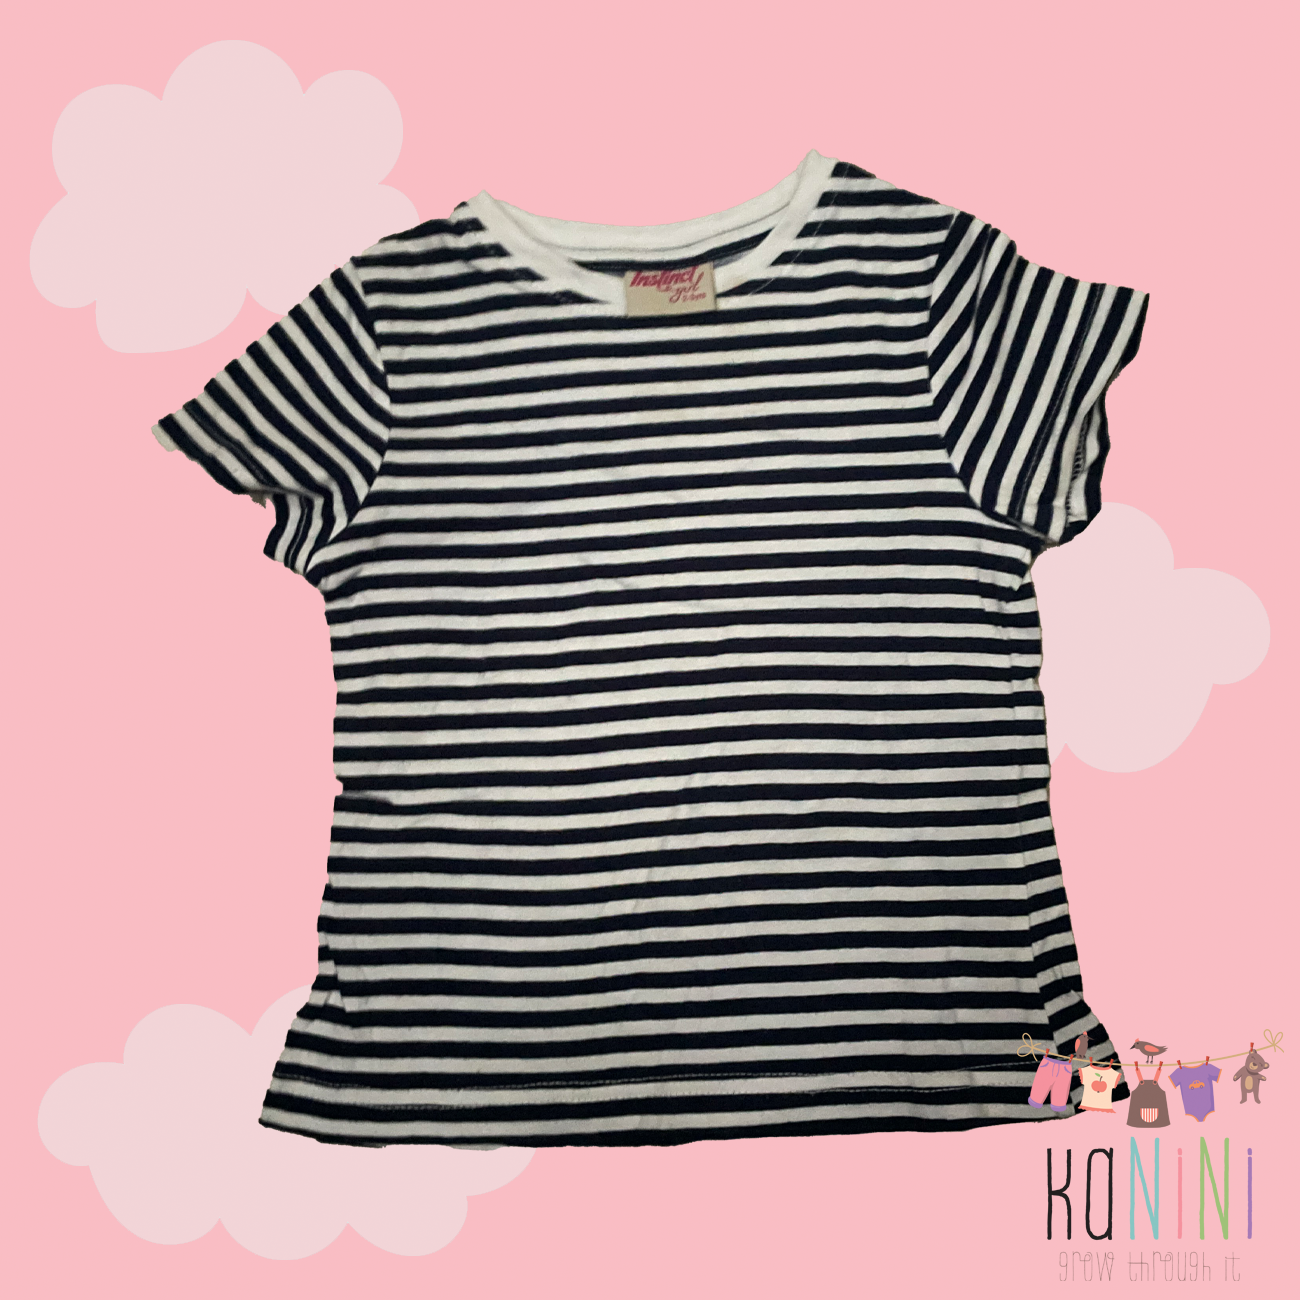 Featured image for “Instinct 2 - 3 Years Girls Navy Striped T-Shirt”